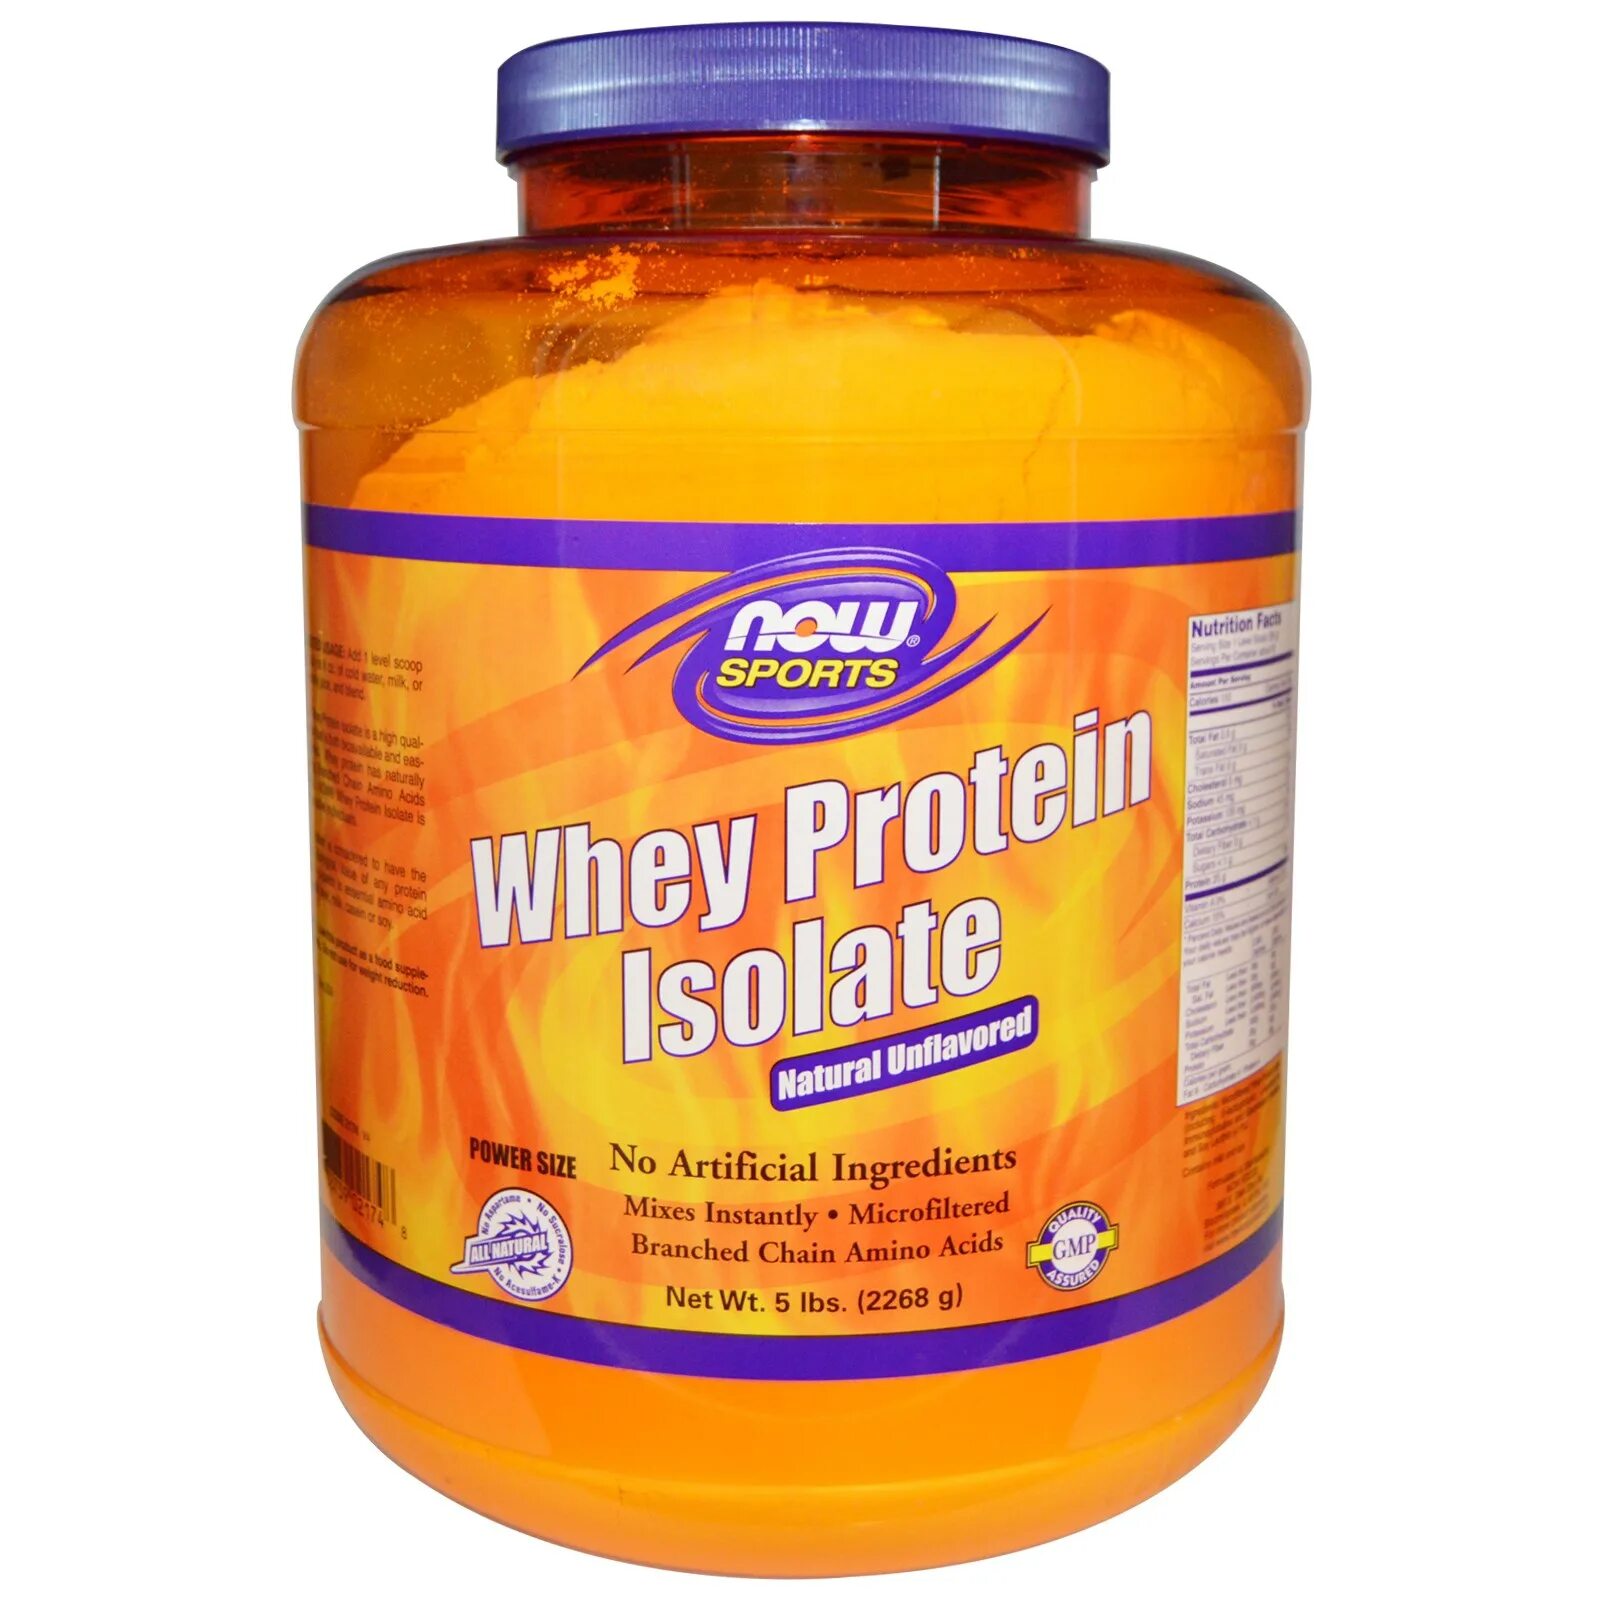 Лучший изолят белка. Протеин Whey Protein isolate. Whey Protein isolate Now Sport. Now foods Sports Whey Protein Concentrate. Natural food протеин.